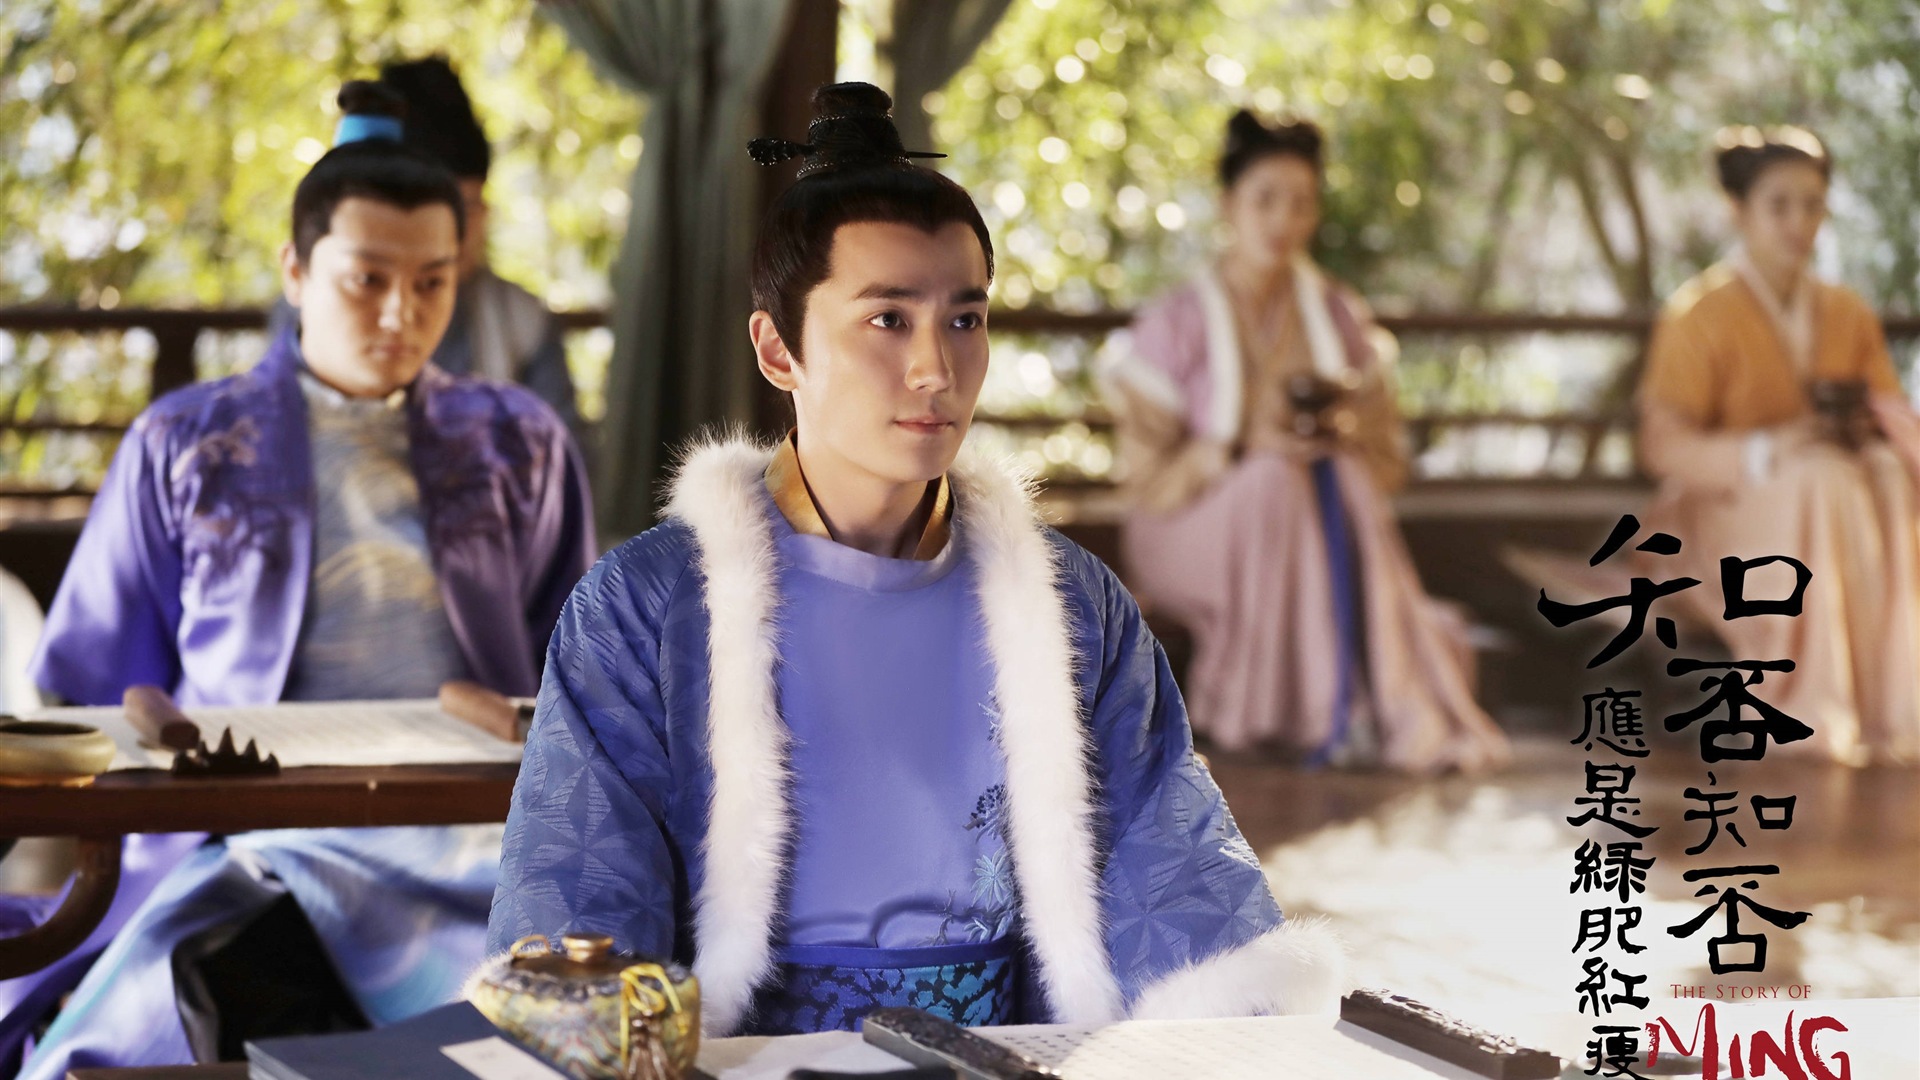 The Story Of MingLan, TV series HD wallpapers #52 - 1920x1080